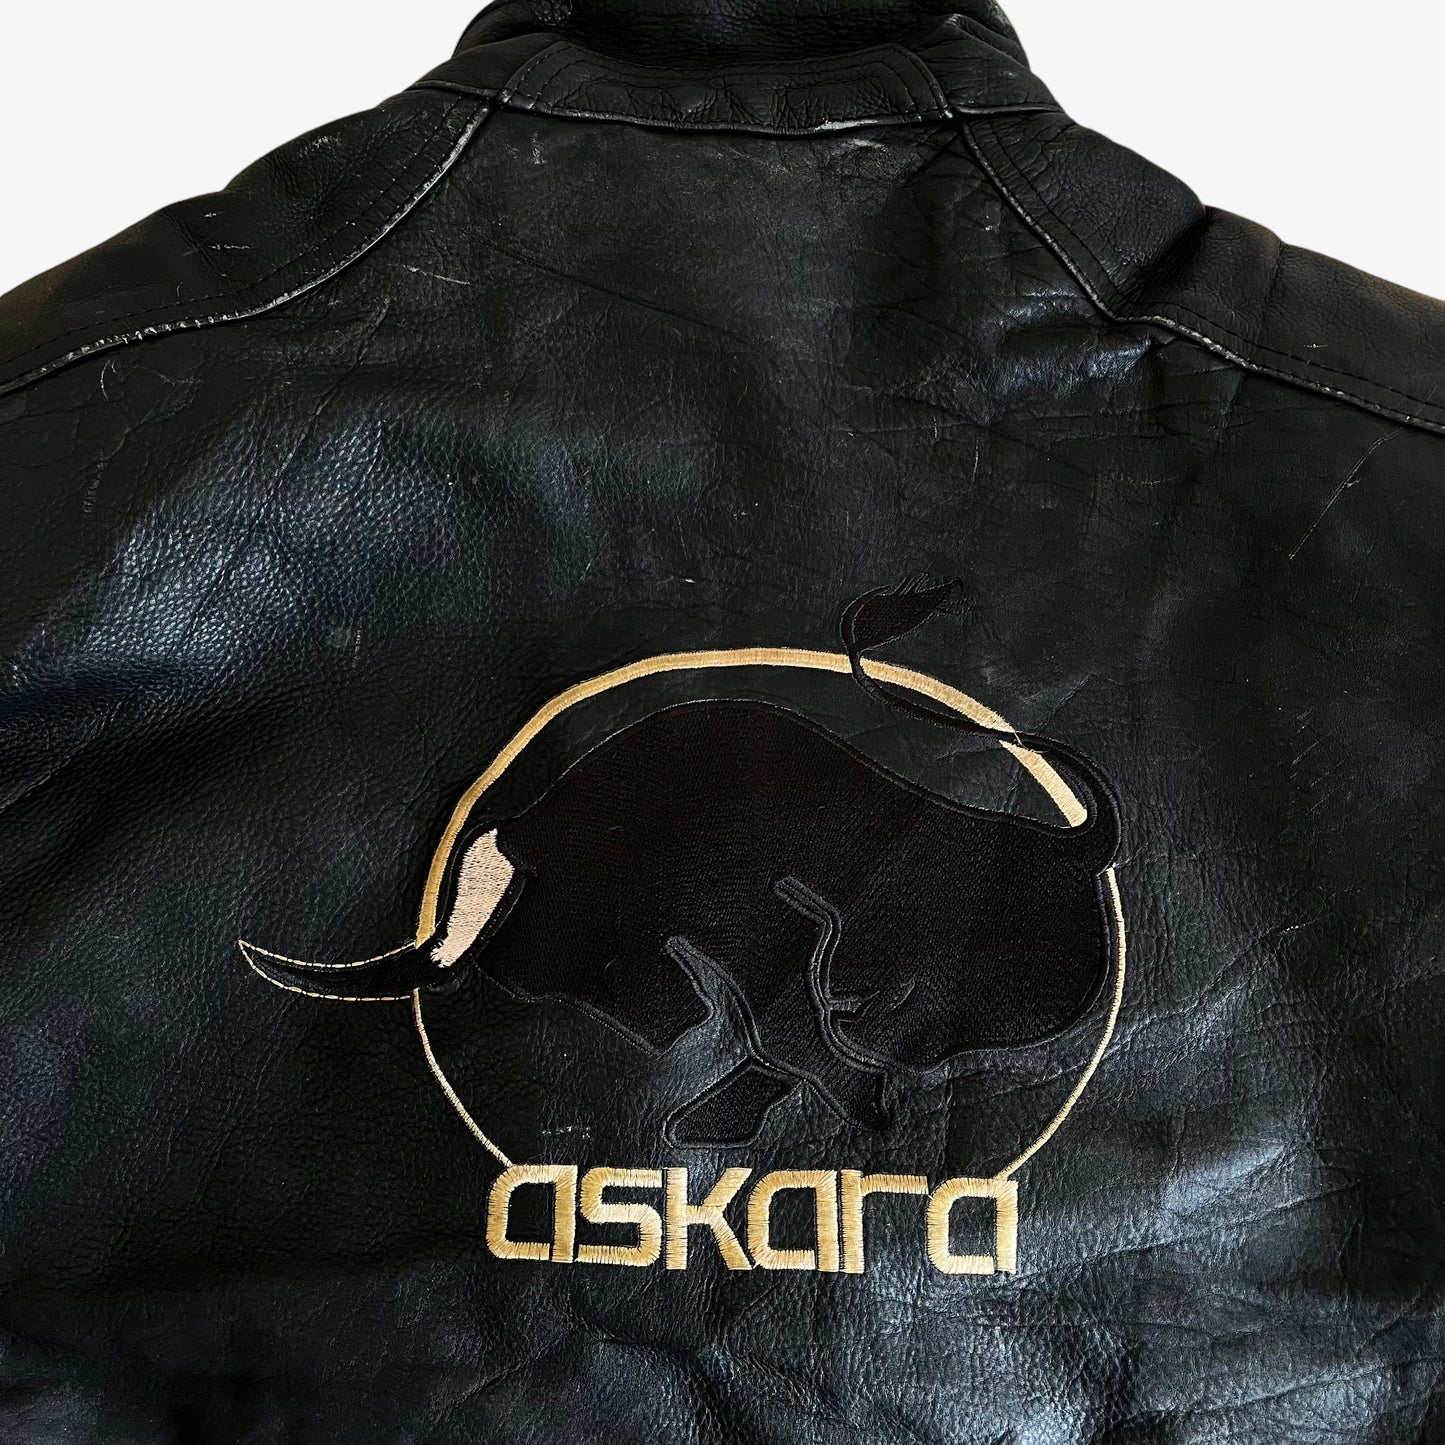 Vintage 90s Askara Paris Black Leather Biker Jacket With Big Back Embroidered Bull Spell Out - Casspios Dream